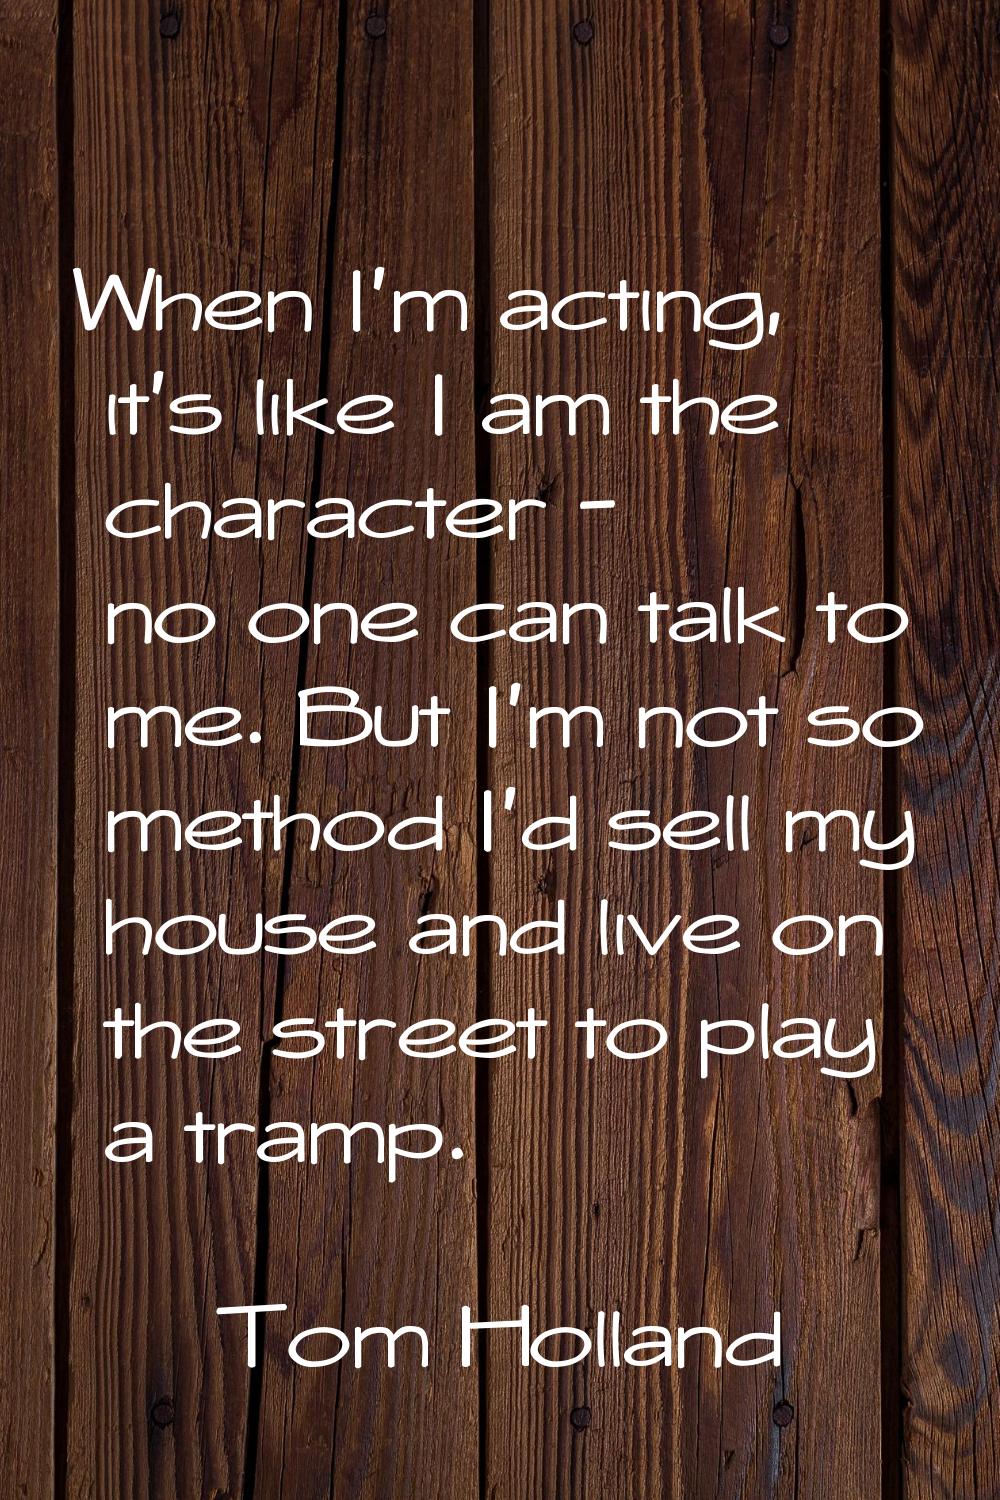 When I'm acting, it's like I am the character - no one can talk to me. But I'm not so method I'd se